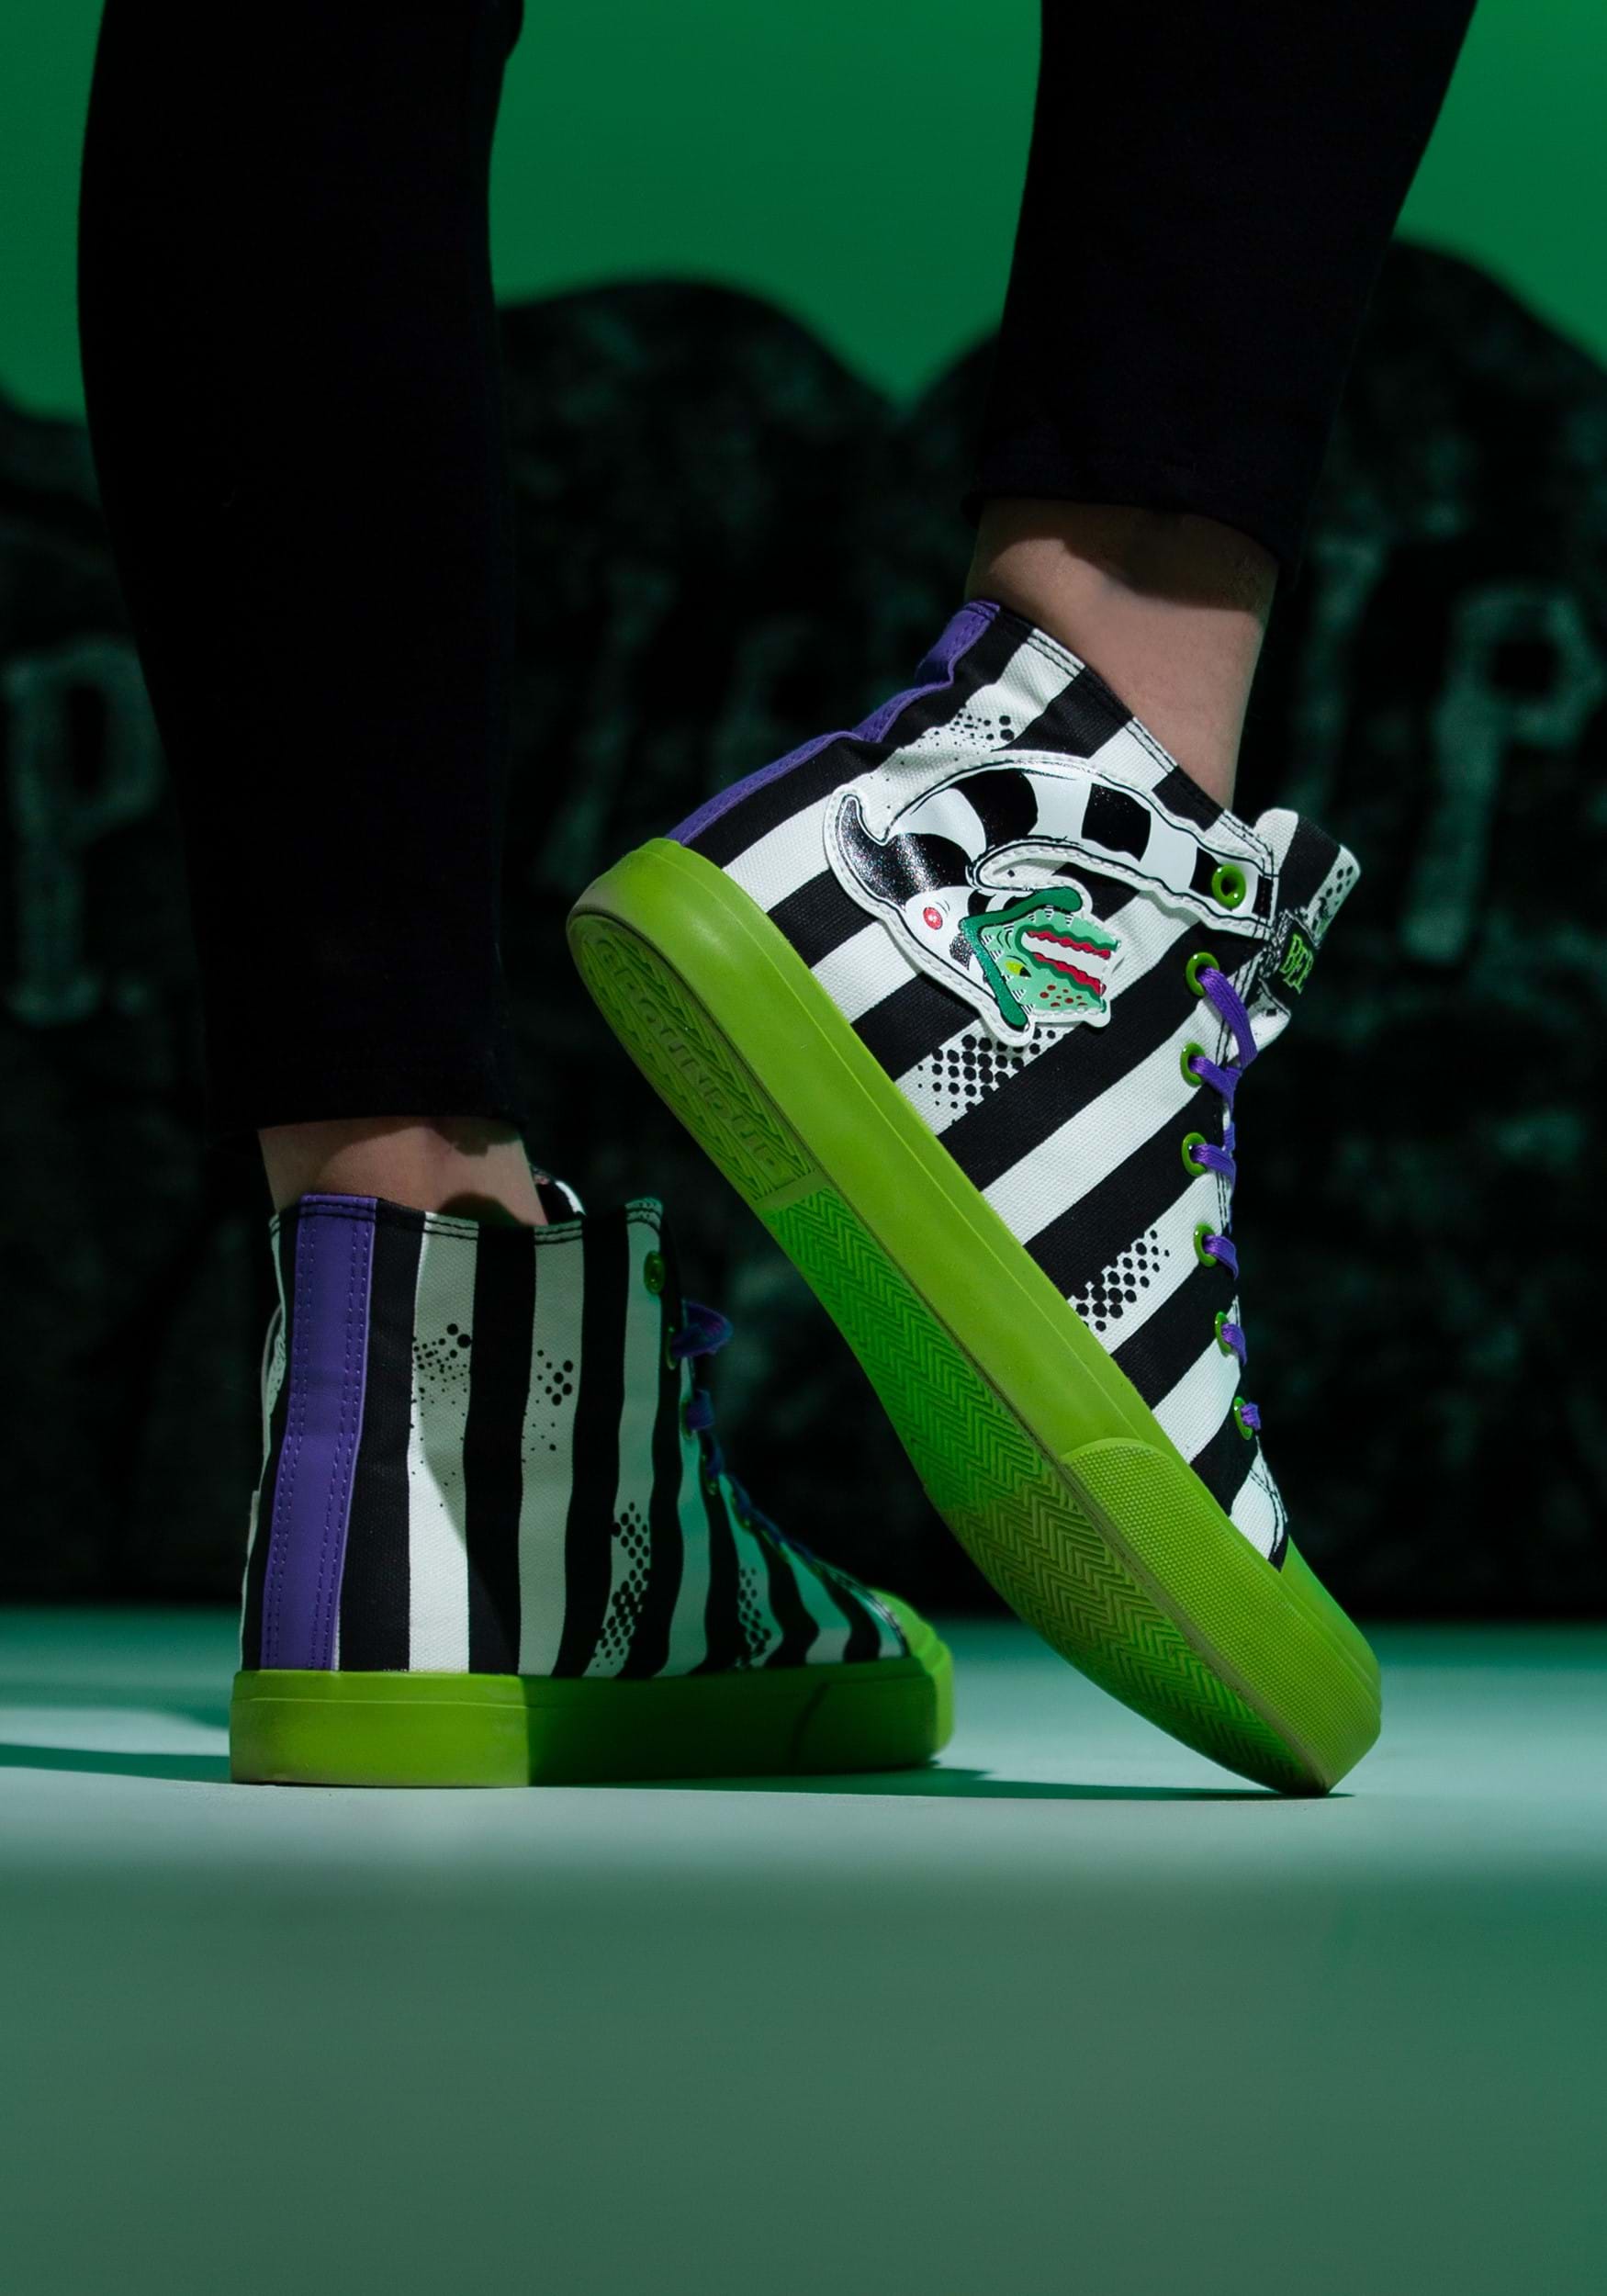 Black And White Striped Beetlejuice Unisex Sneakers